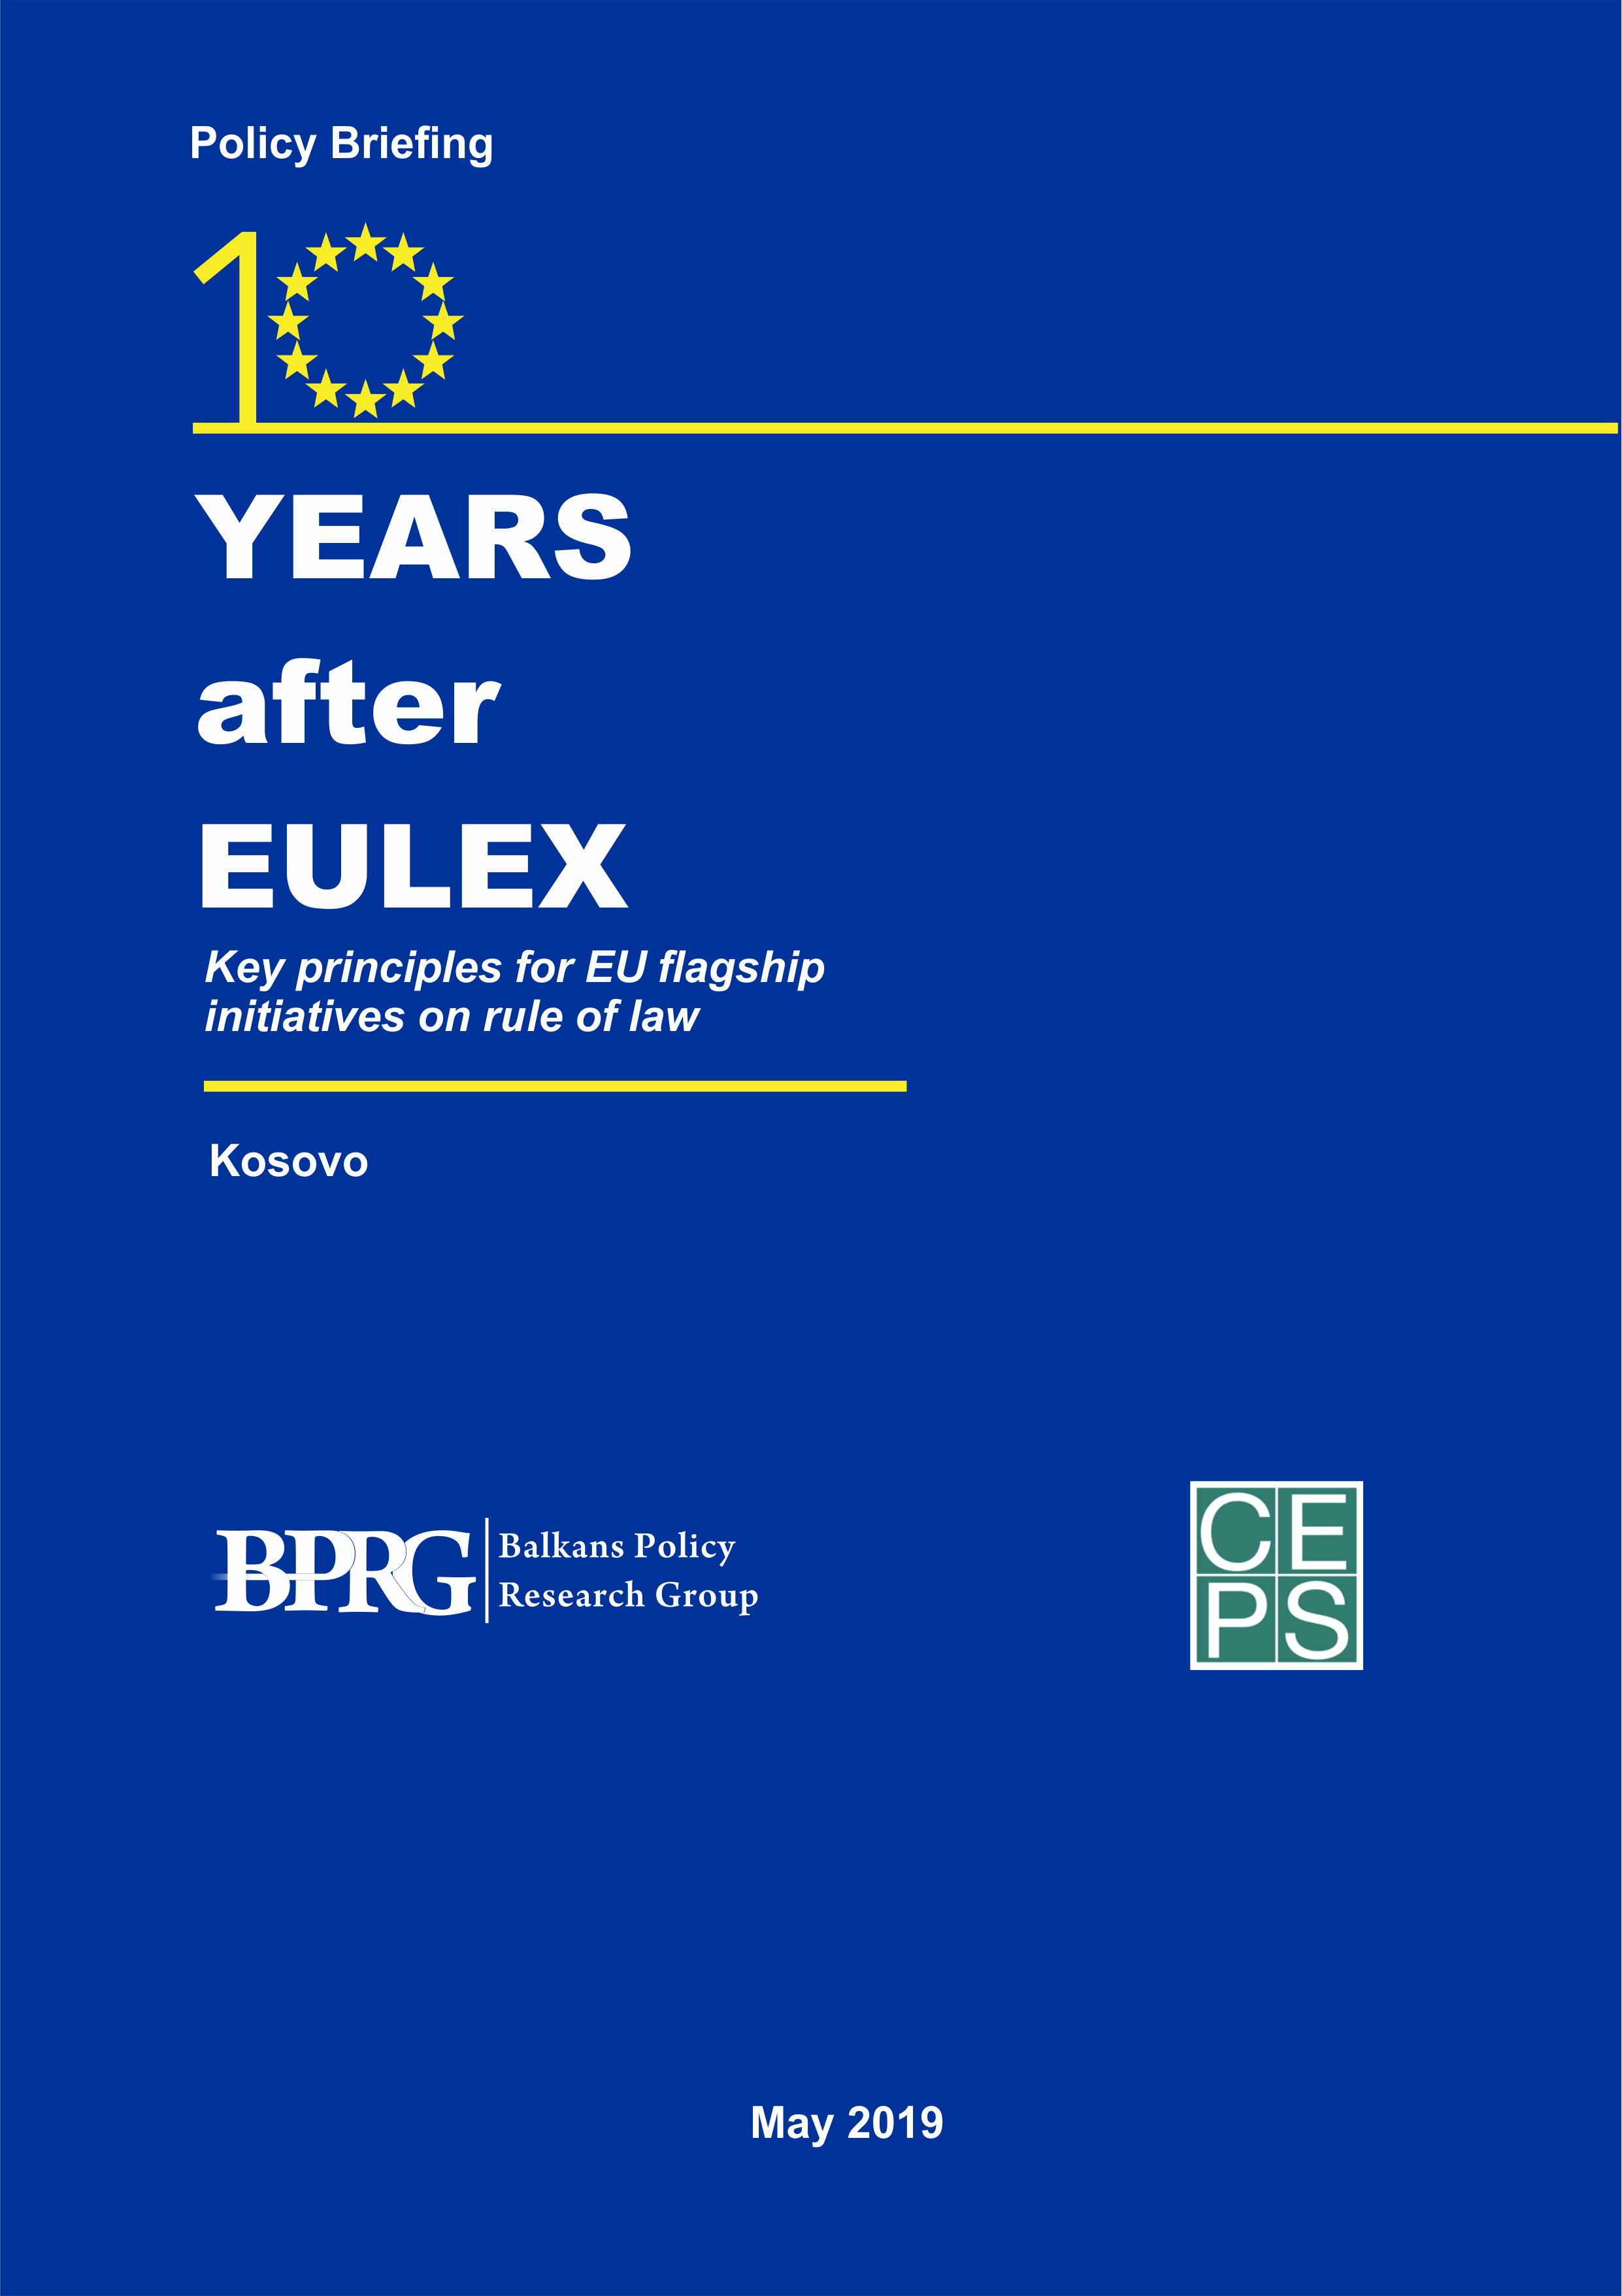 Ten Years after EULEX – Key Principles for Future EU Flagship Initiatives on the Rule of Law